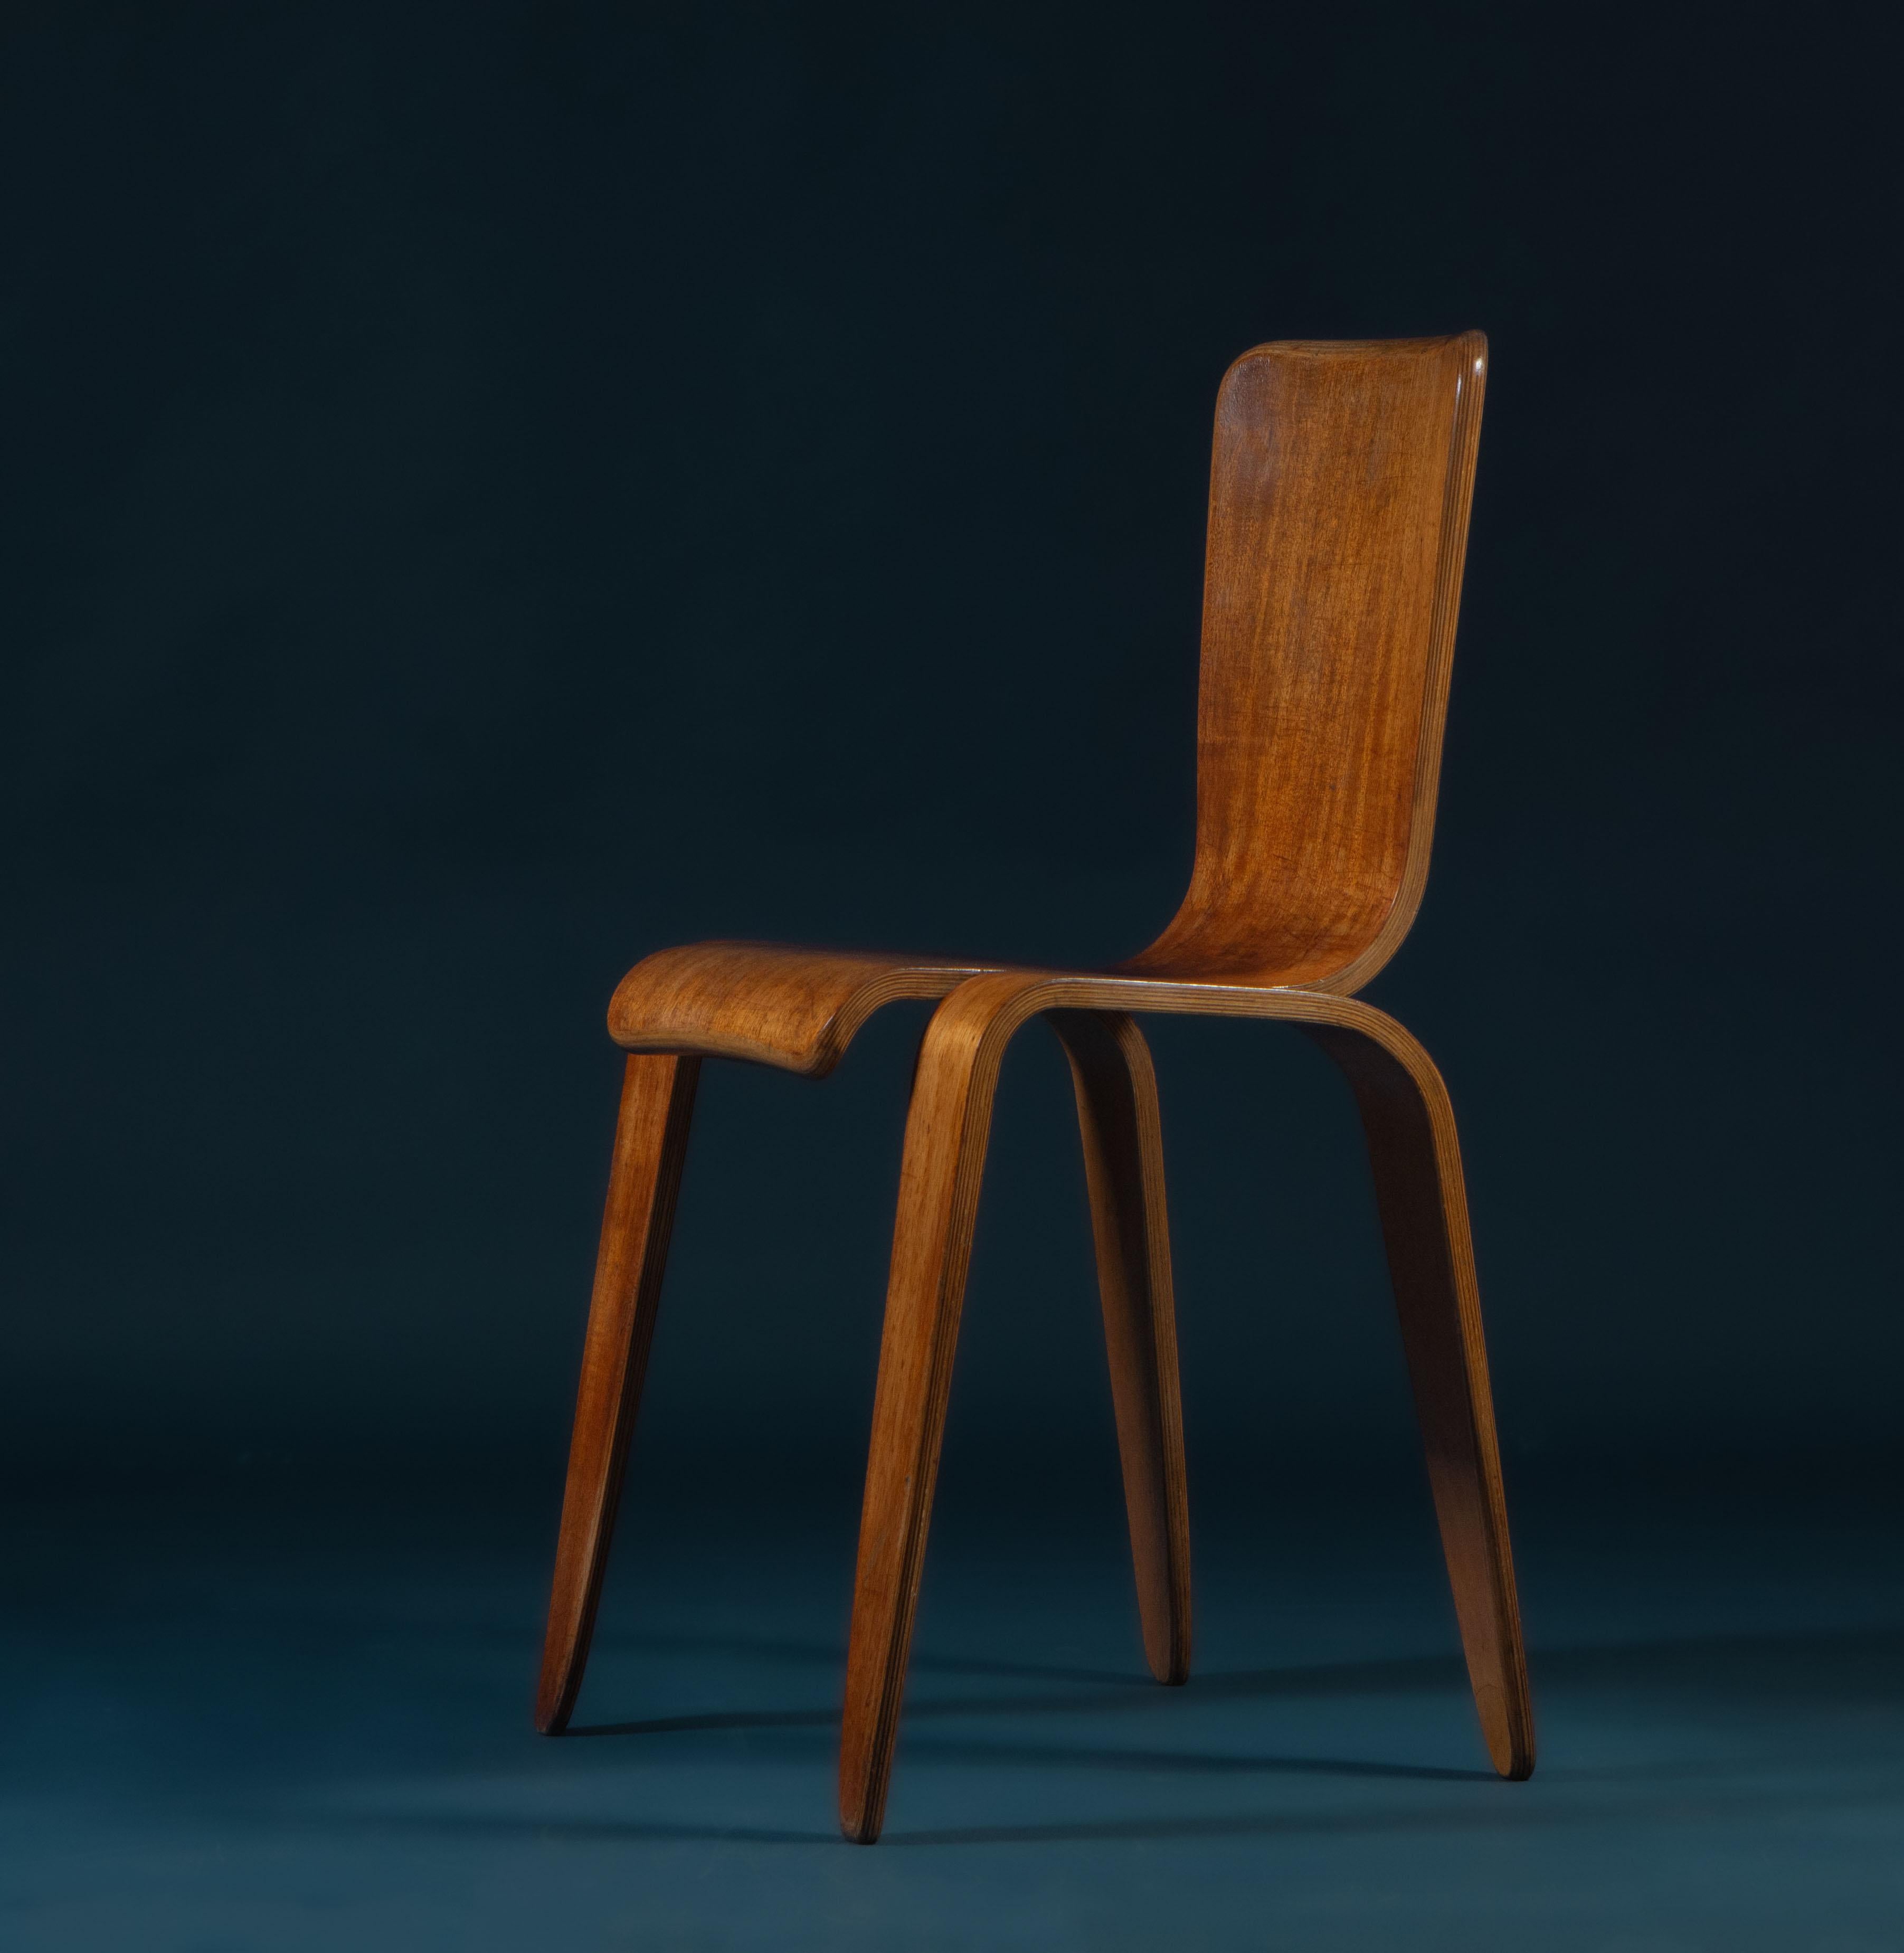 Rare bentply Bambi chair designed by Han Pieck (1924 - 2010) for Morris & Co of Glasgow. Circa 1946.

This beautiful chair was made in a very limited production of only 200. Made of layers of plywood moulded in a single sheet, with birch veneer to